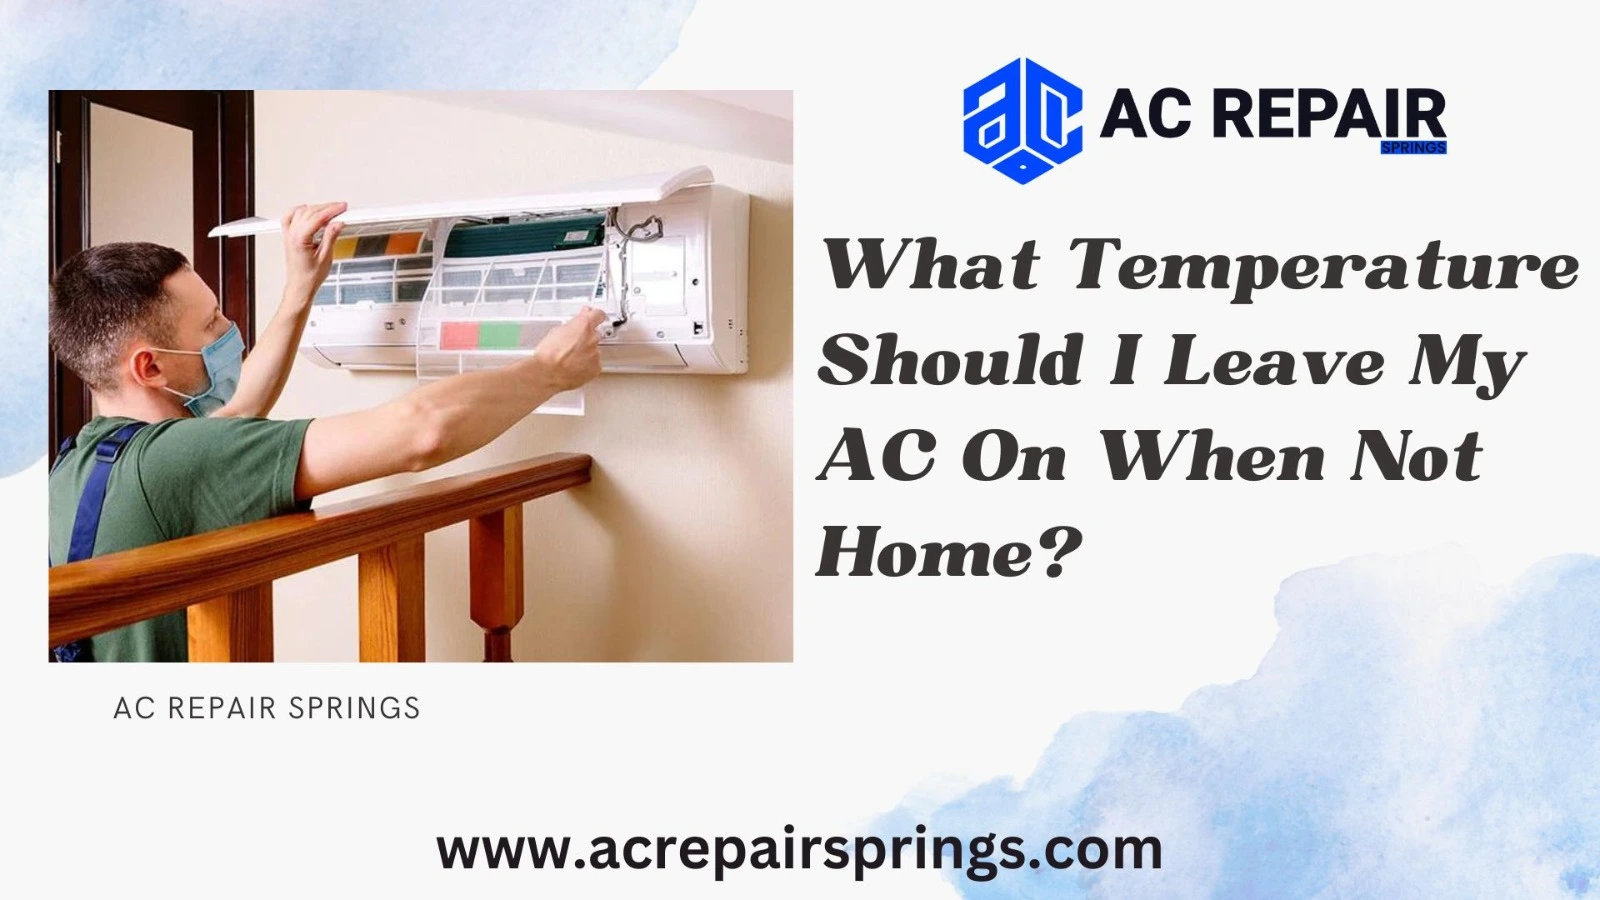 What Temperature Should I Leave My AC On When Not Home?